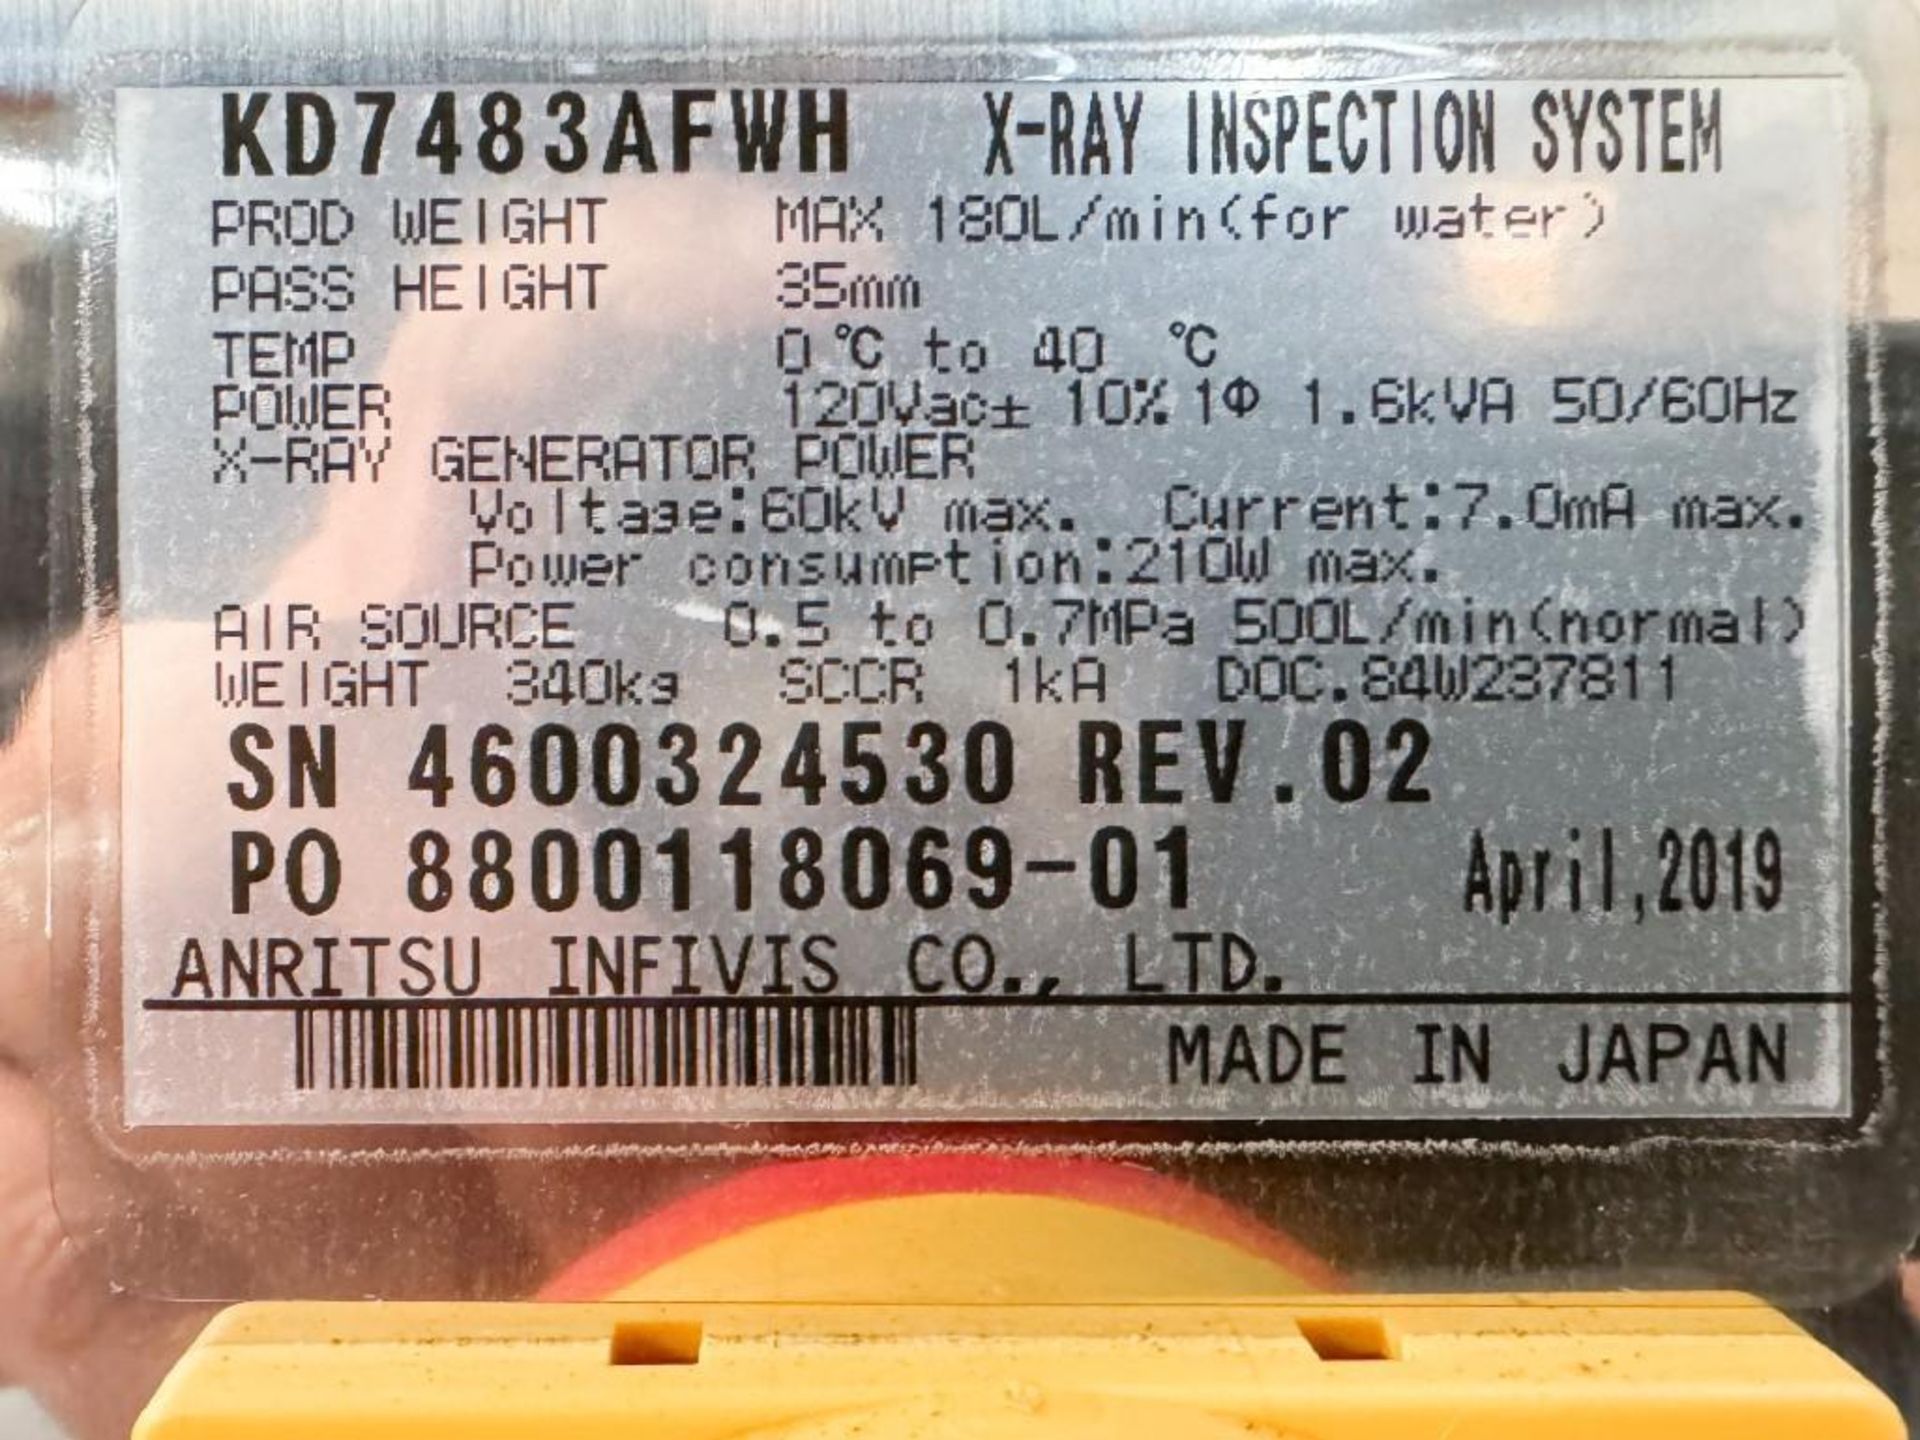 Anritsu Pipeline Inspection X-Ray Inspection System - Image 5 of 7